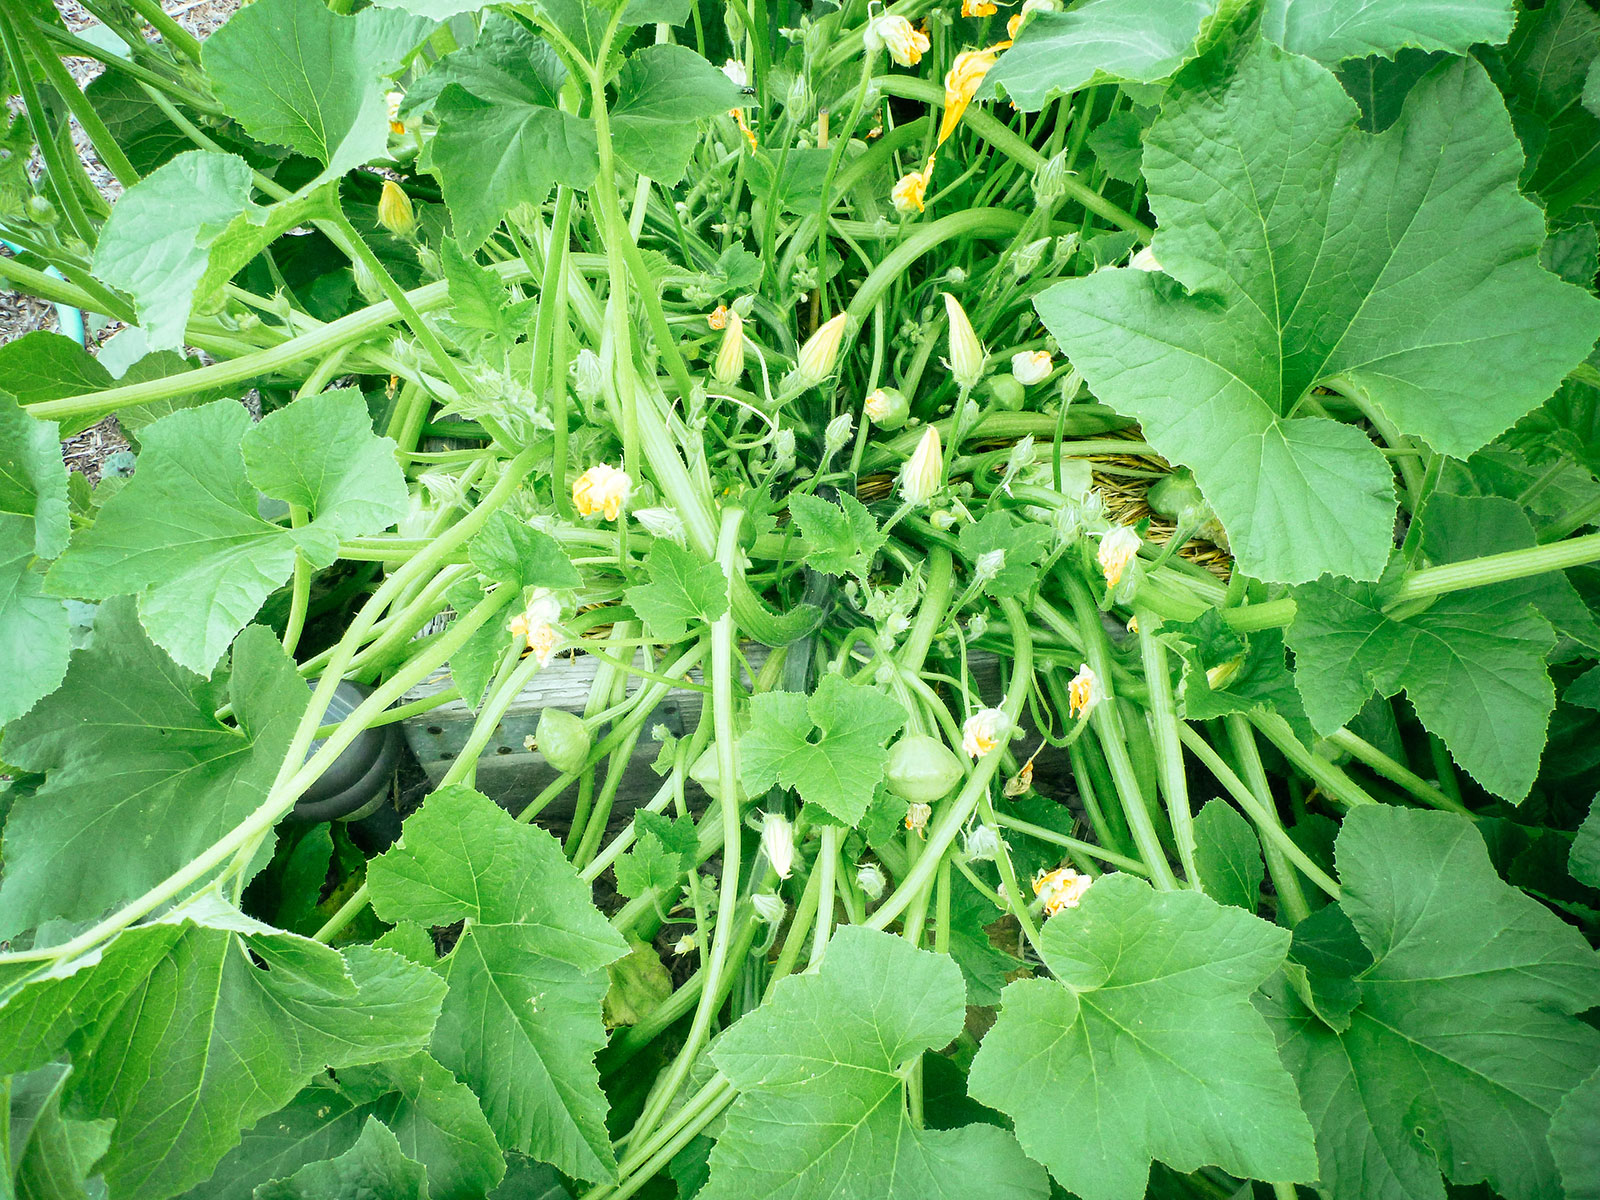 Squash plant laden with male and female flowers